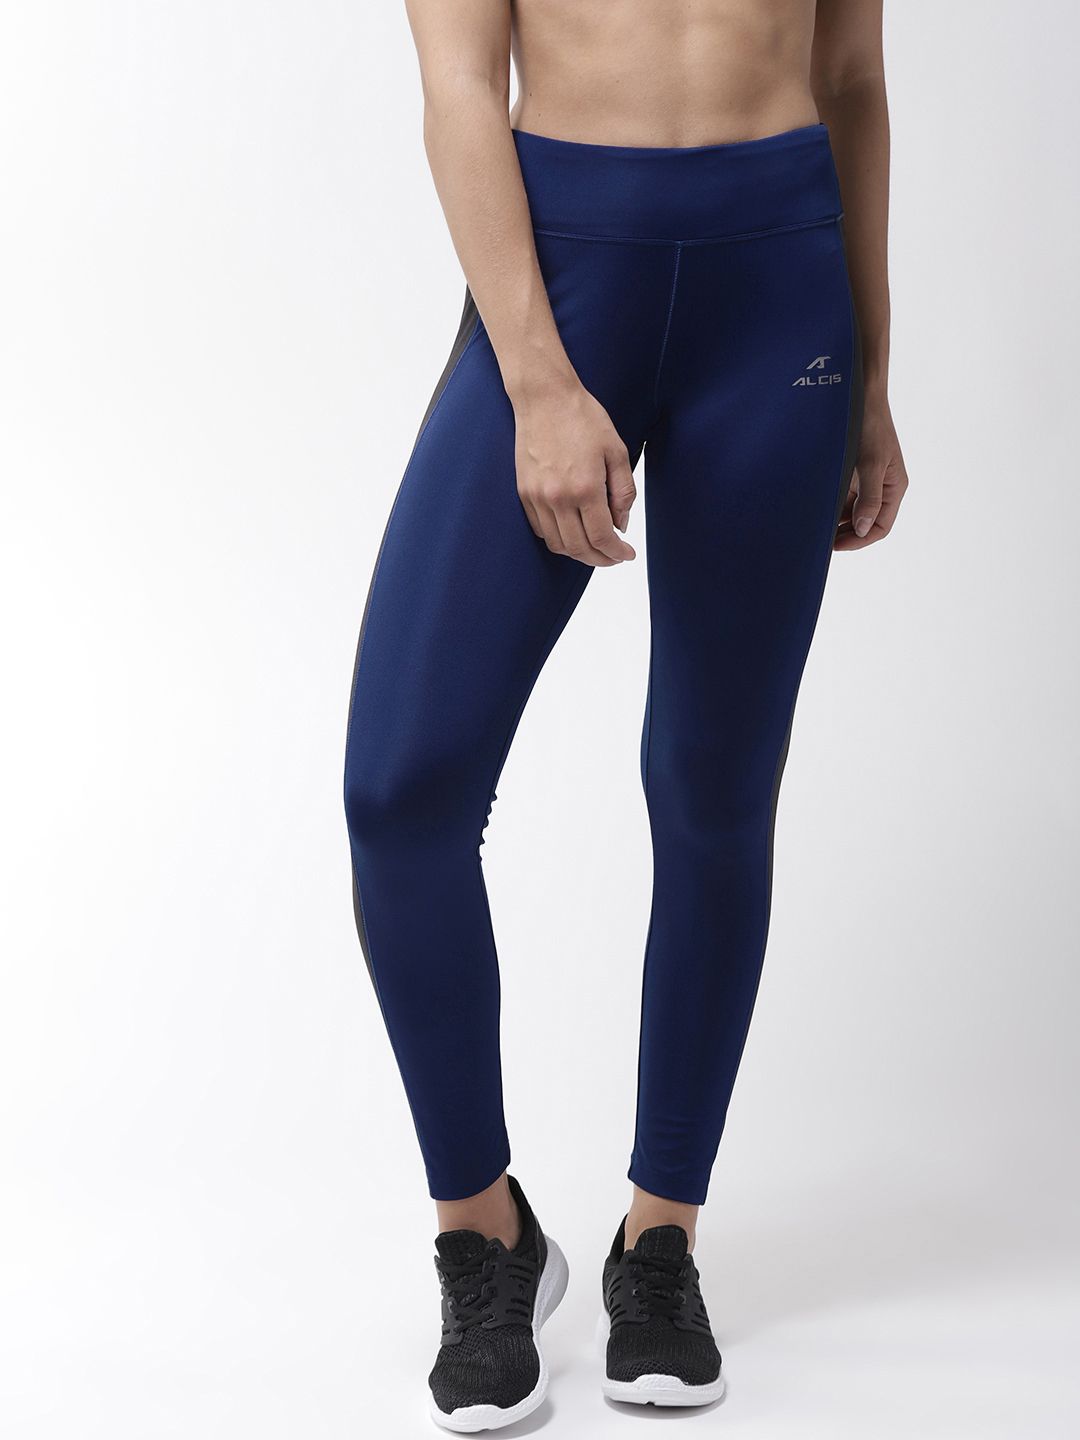 Alcis Women Blue & Black Solid Tights Price in India